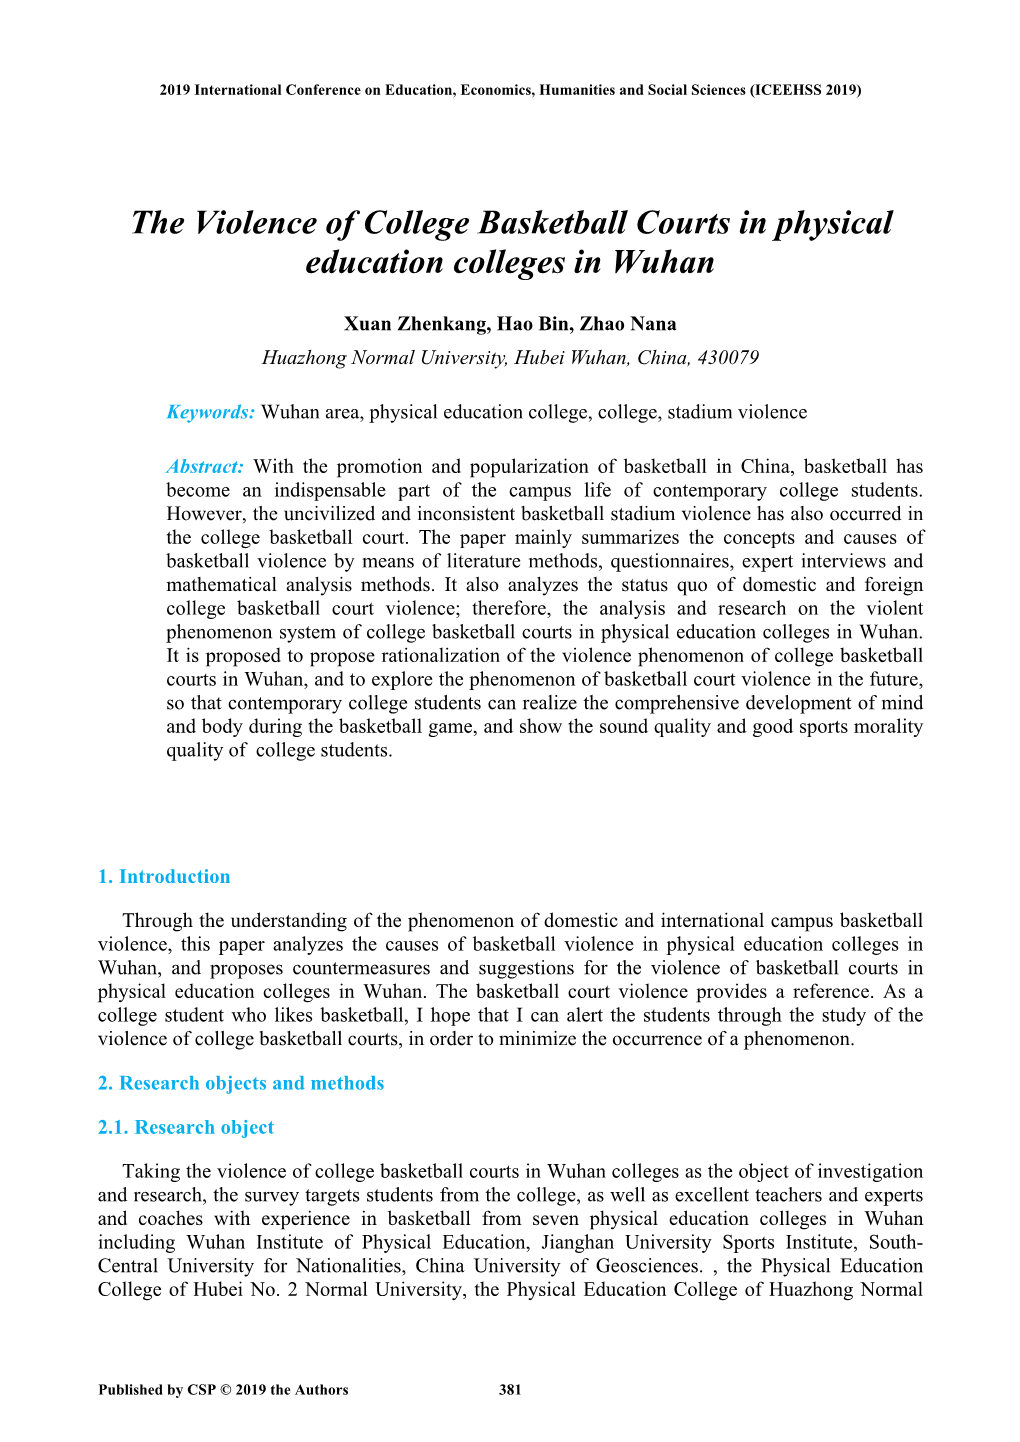 The Violence of College Basketball Courts in Physical Education Colleges in Wuhan